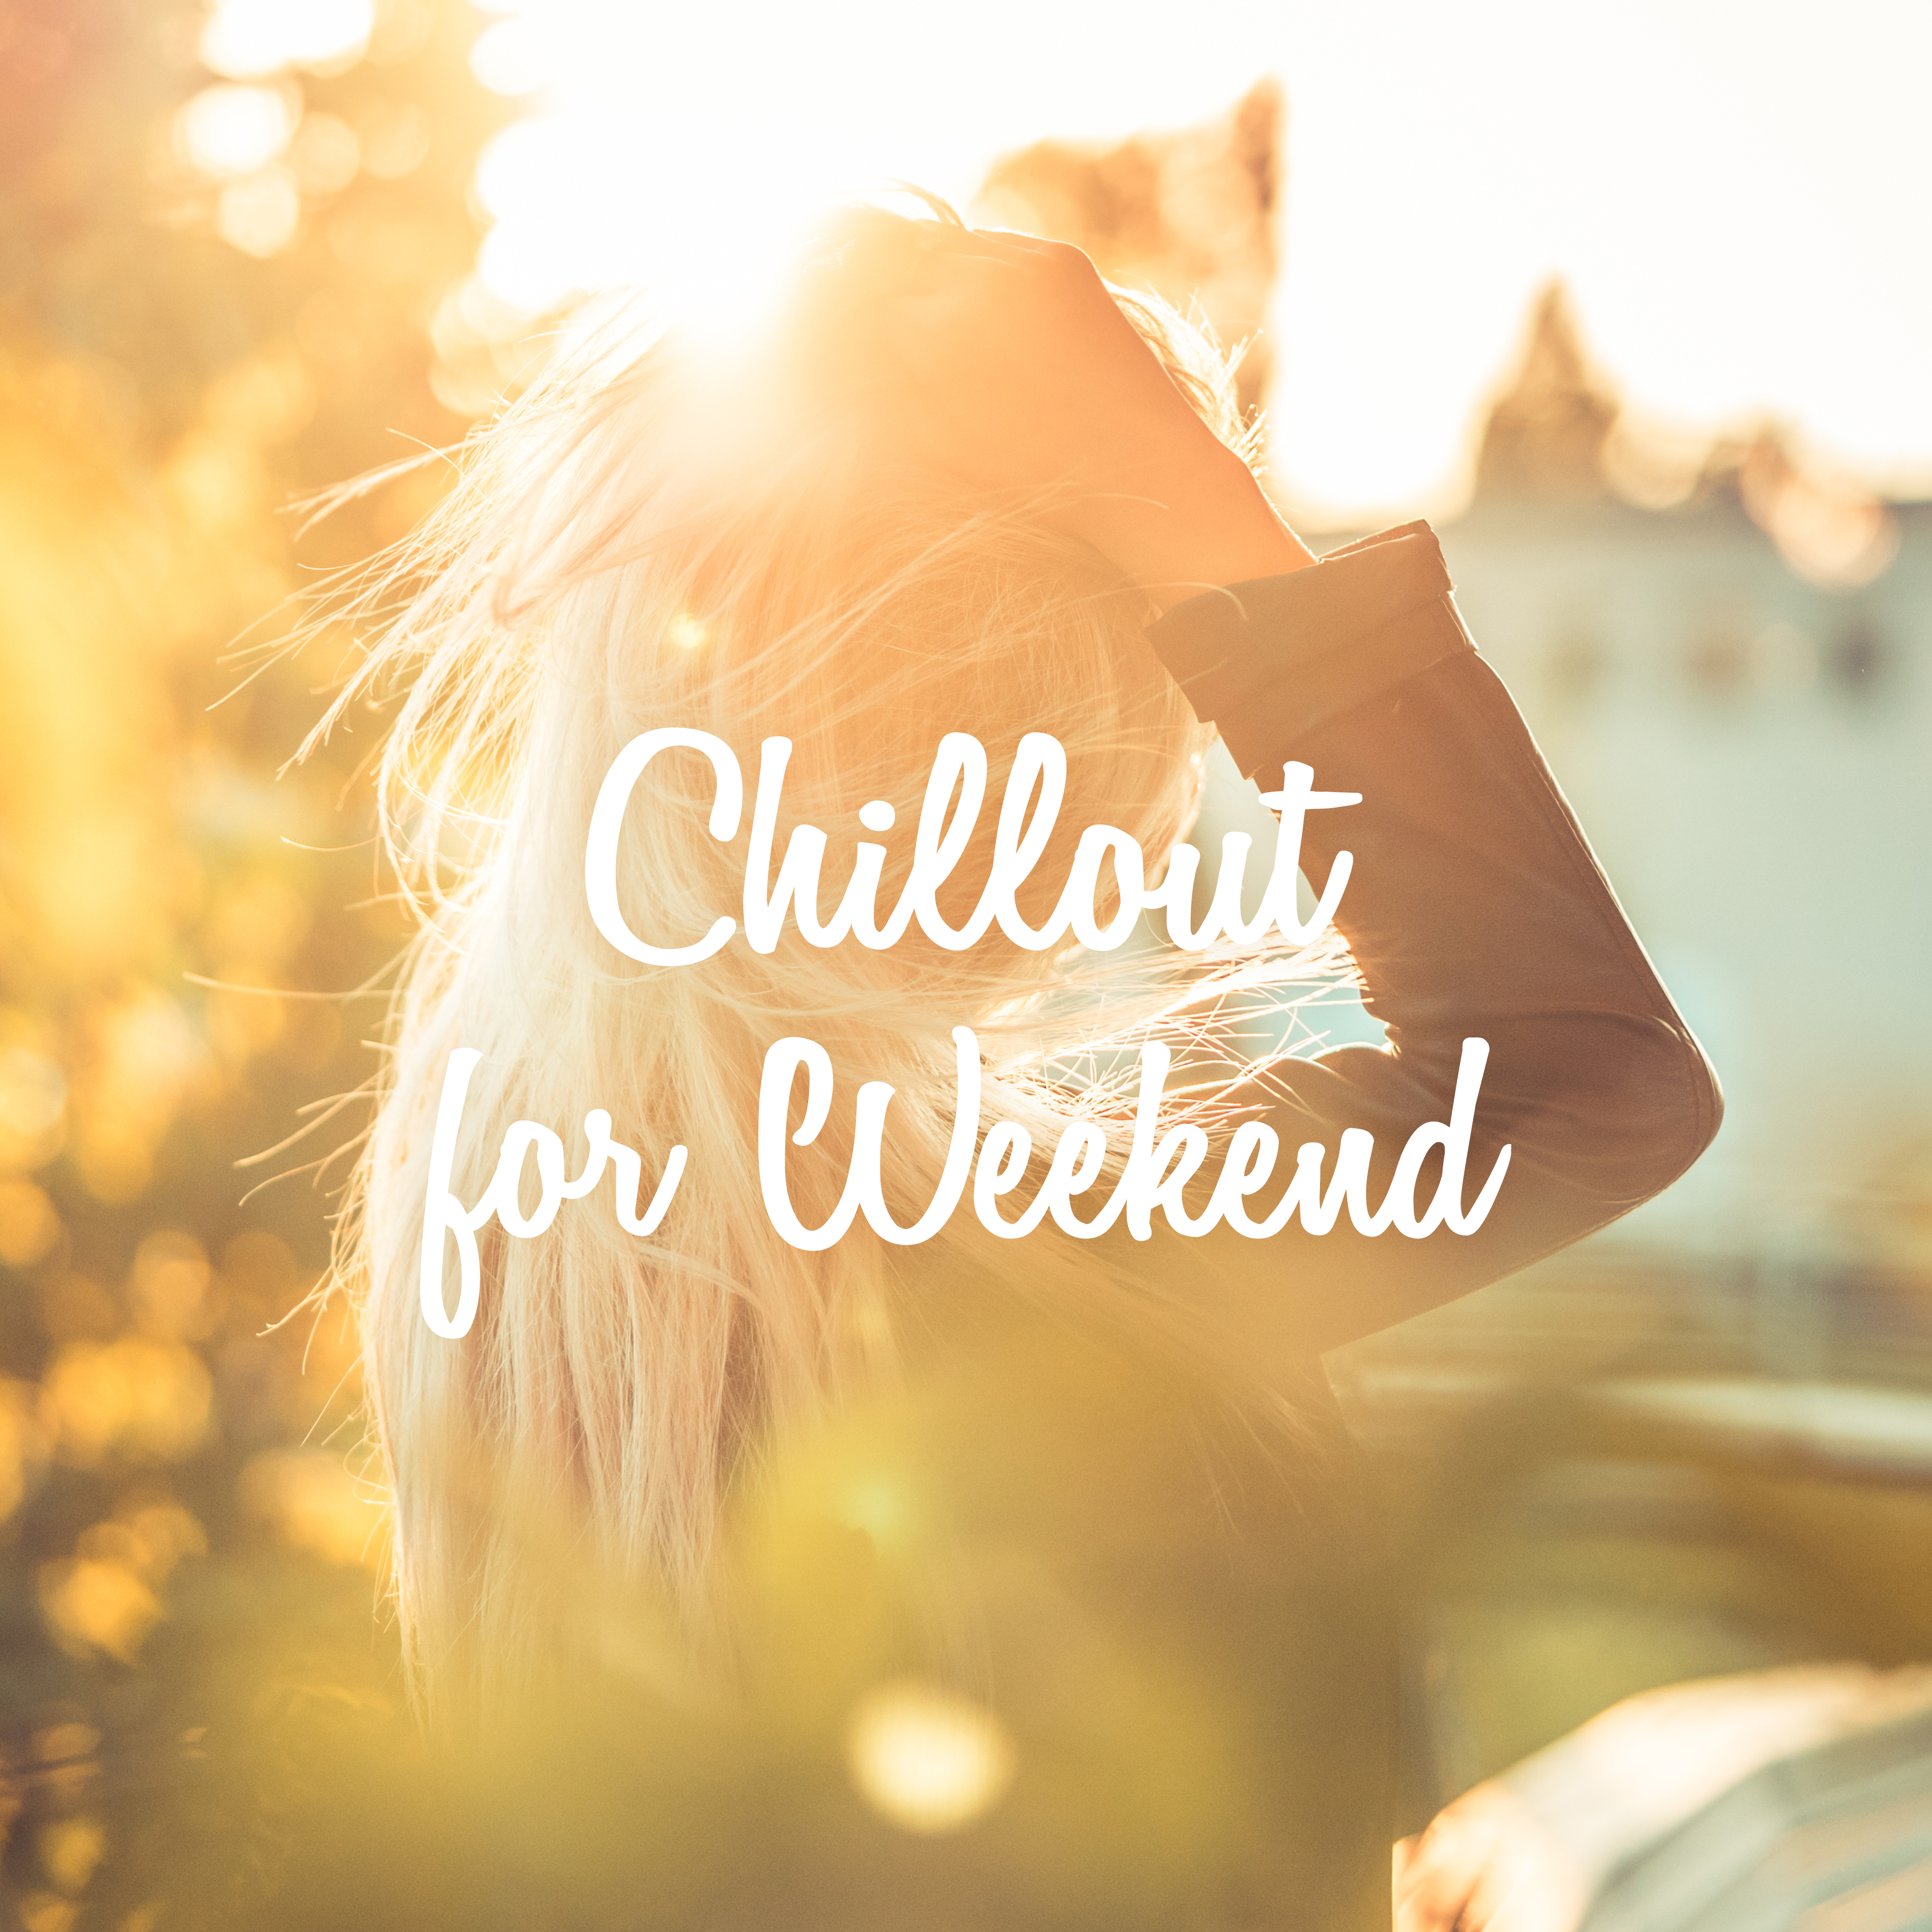 Chillout for Weekend – Fresh Chillout Beats, Electronic Music, Chill Out 2017, Relax, Summer, Lounge